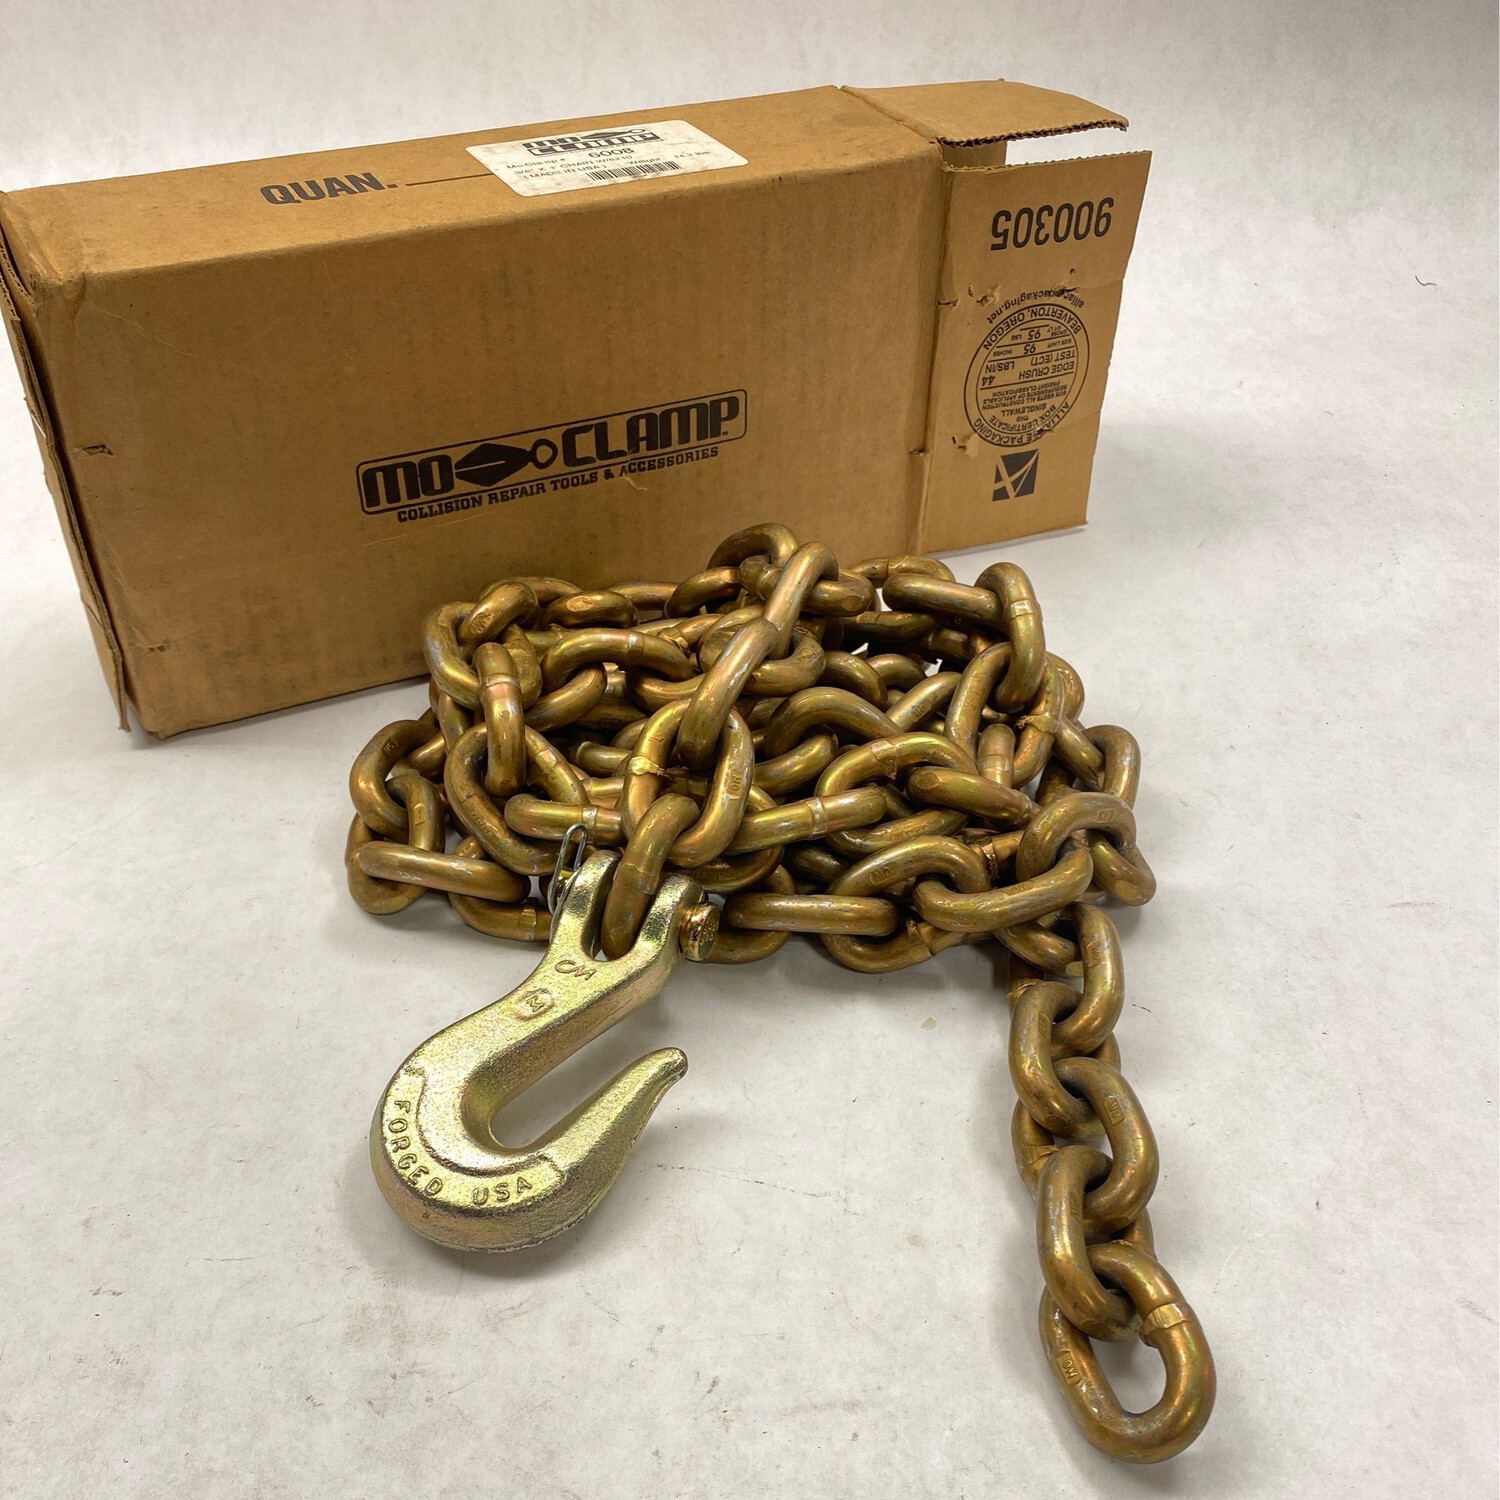 Mo Clamp 3/8” x 8’ Frame Straightening Chain With Grab Hook, 6008